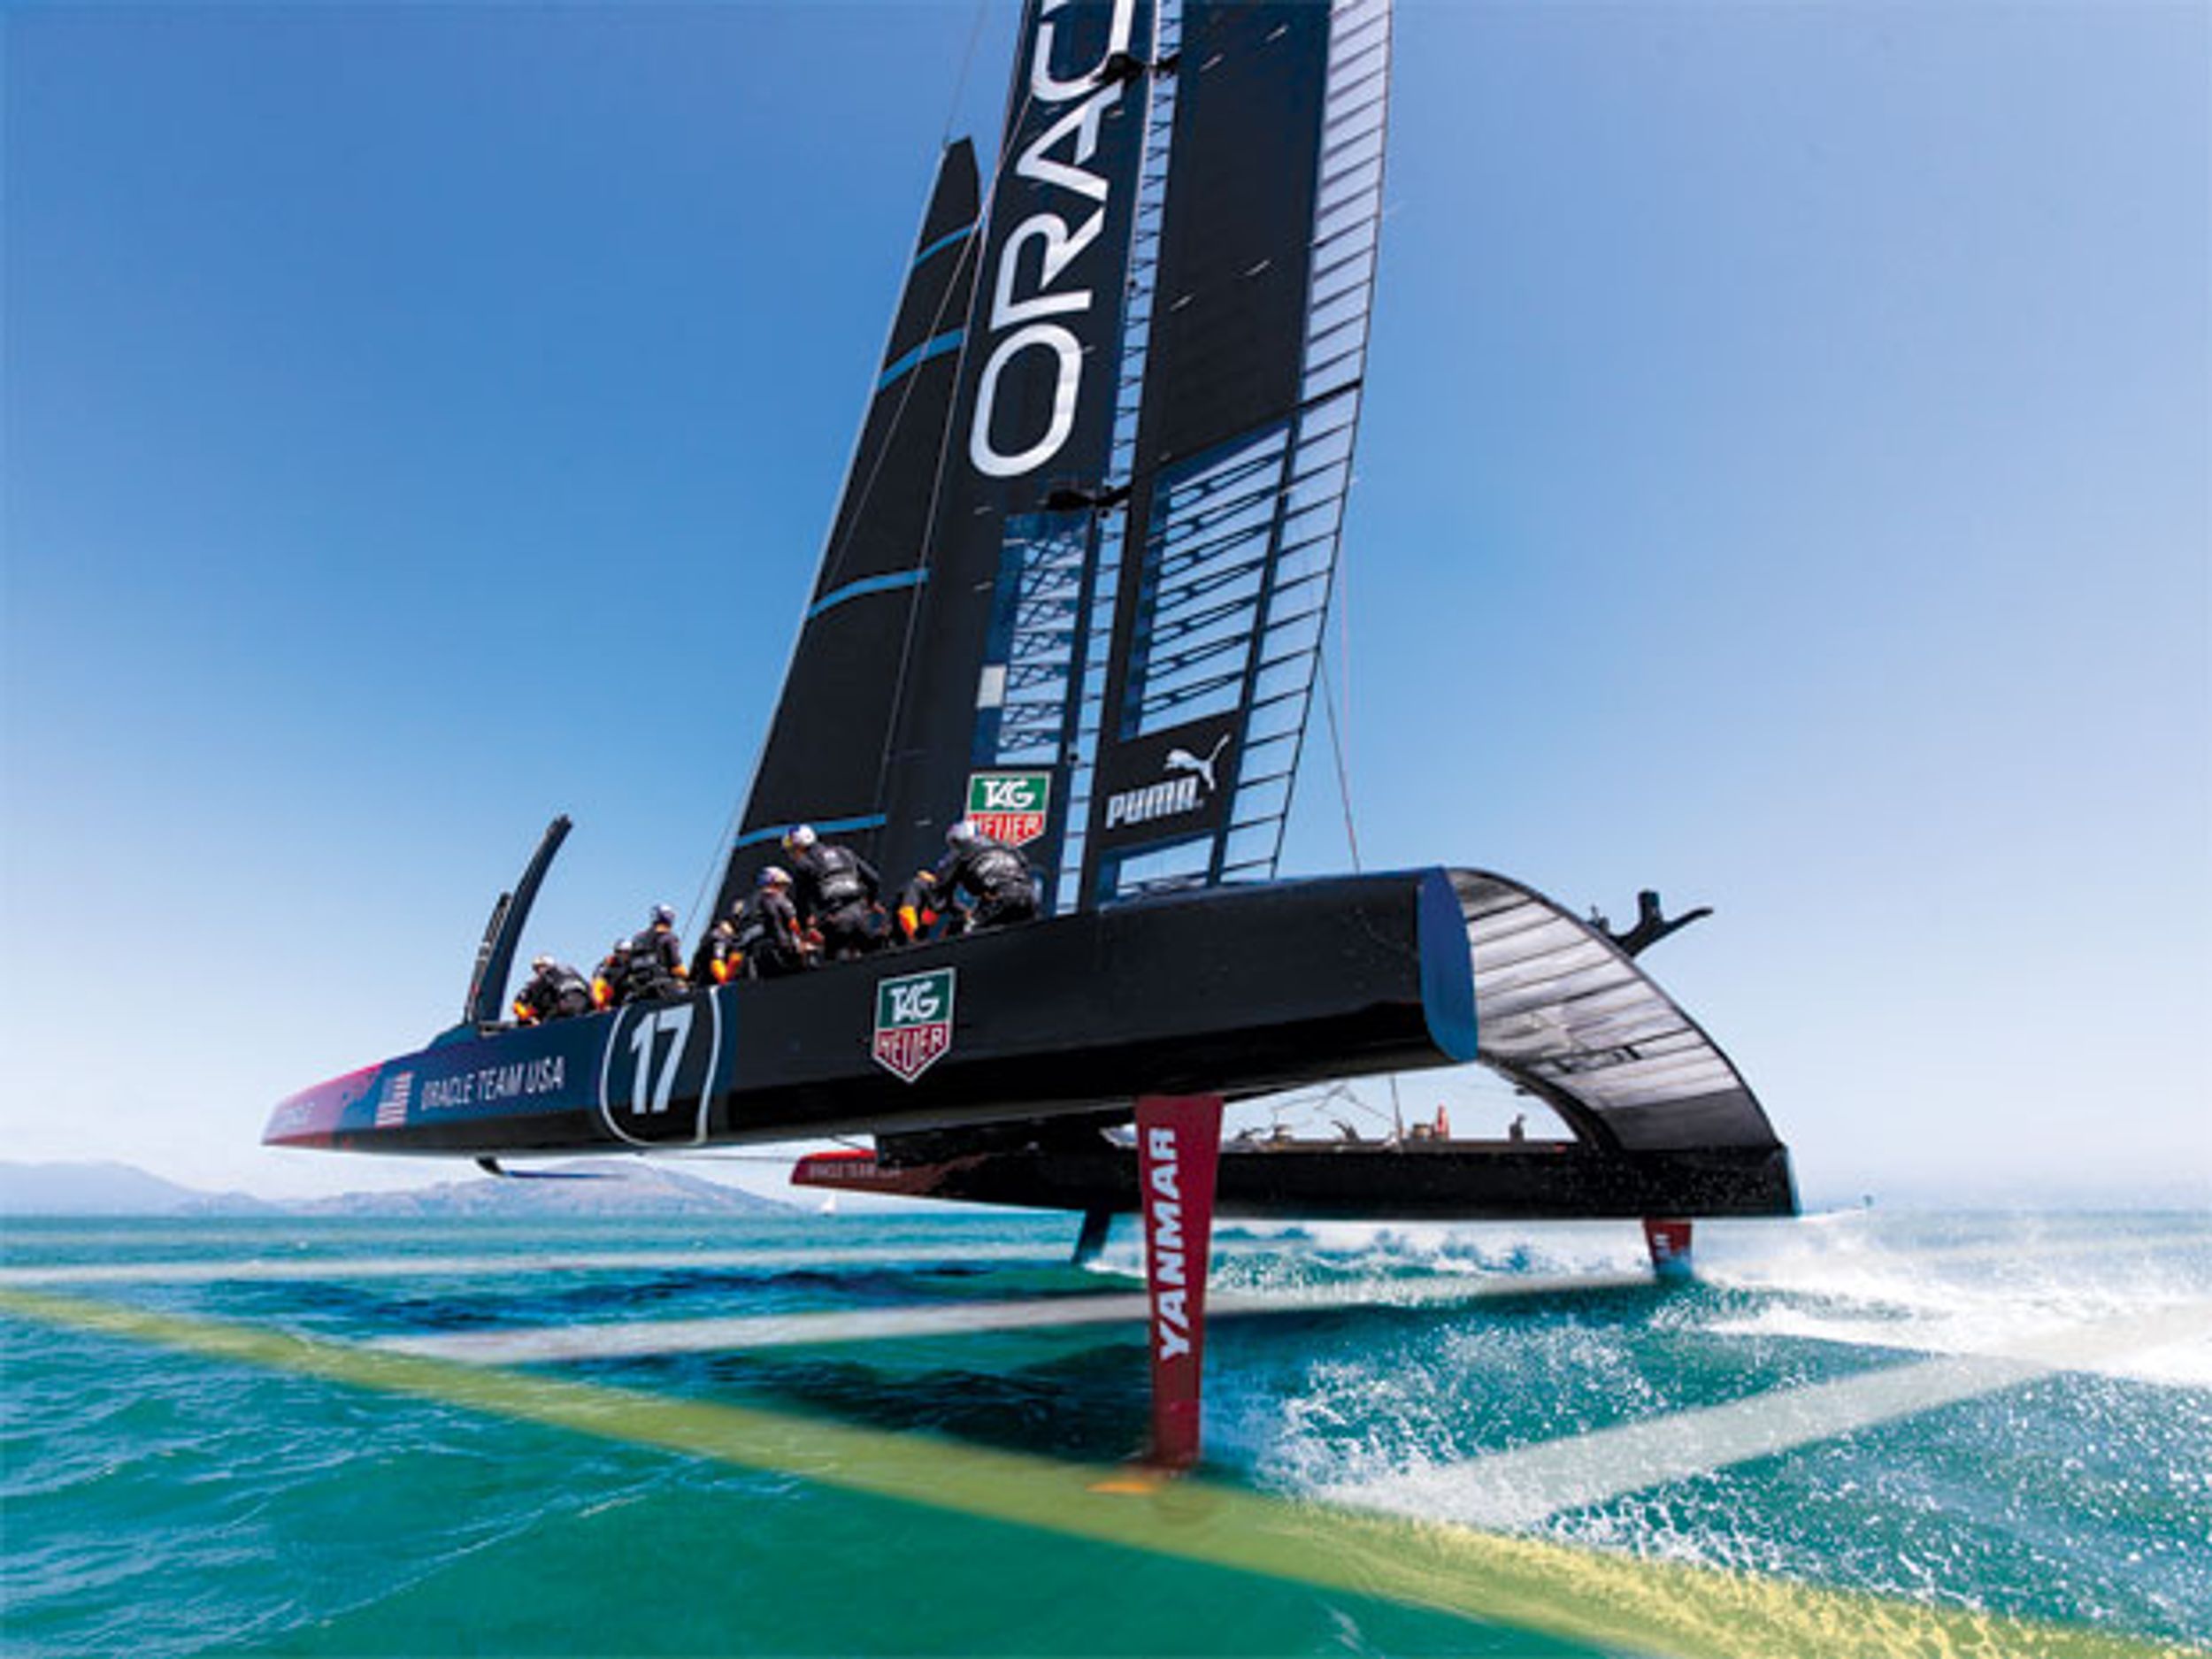 Photo of the Oracle Team USA’s boat.